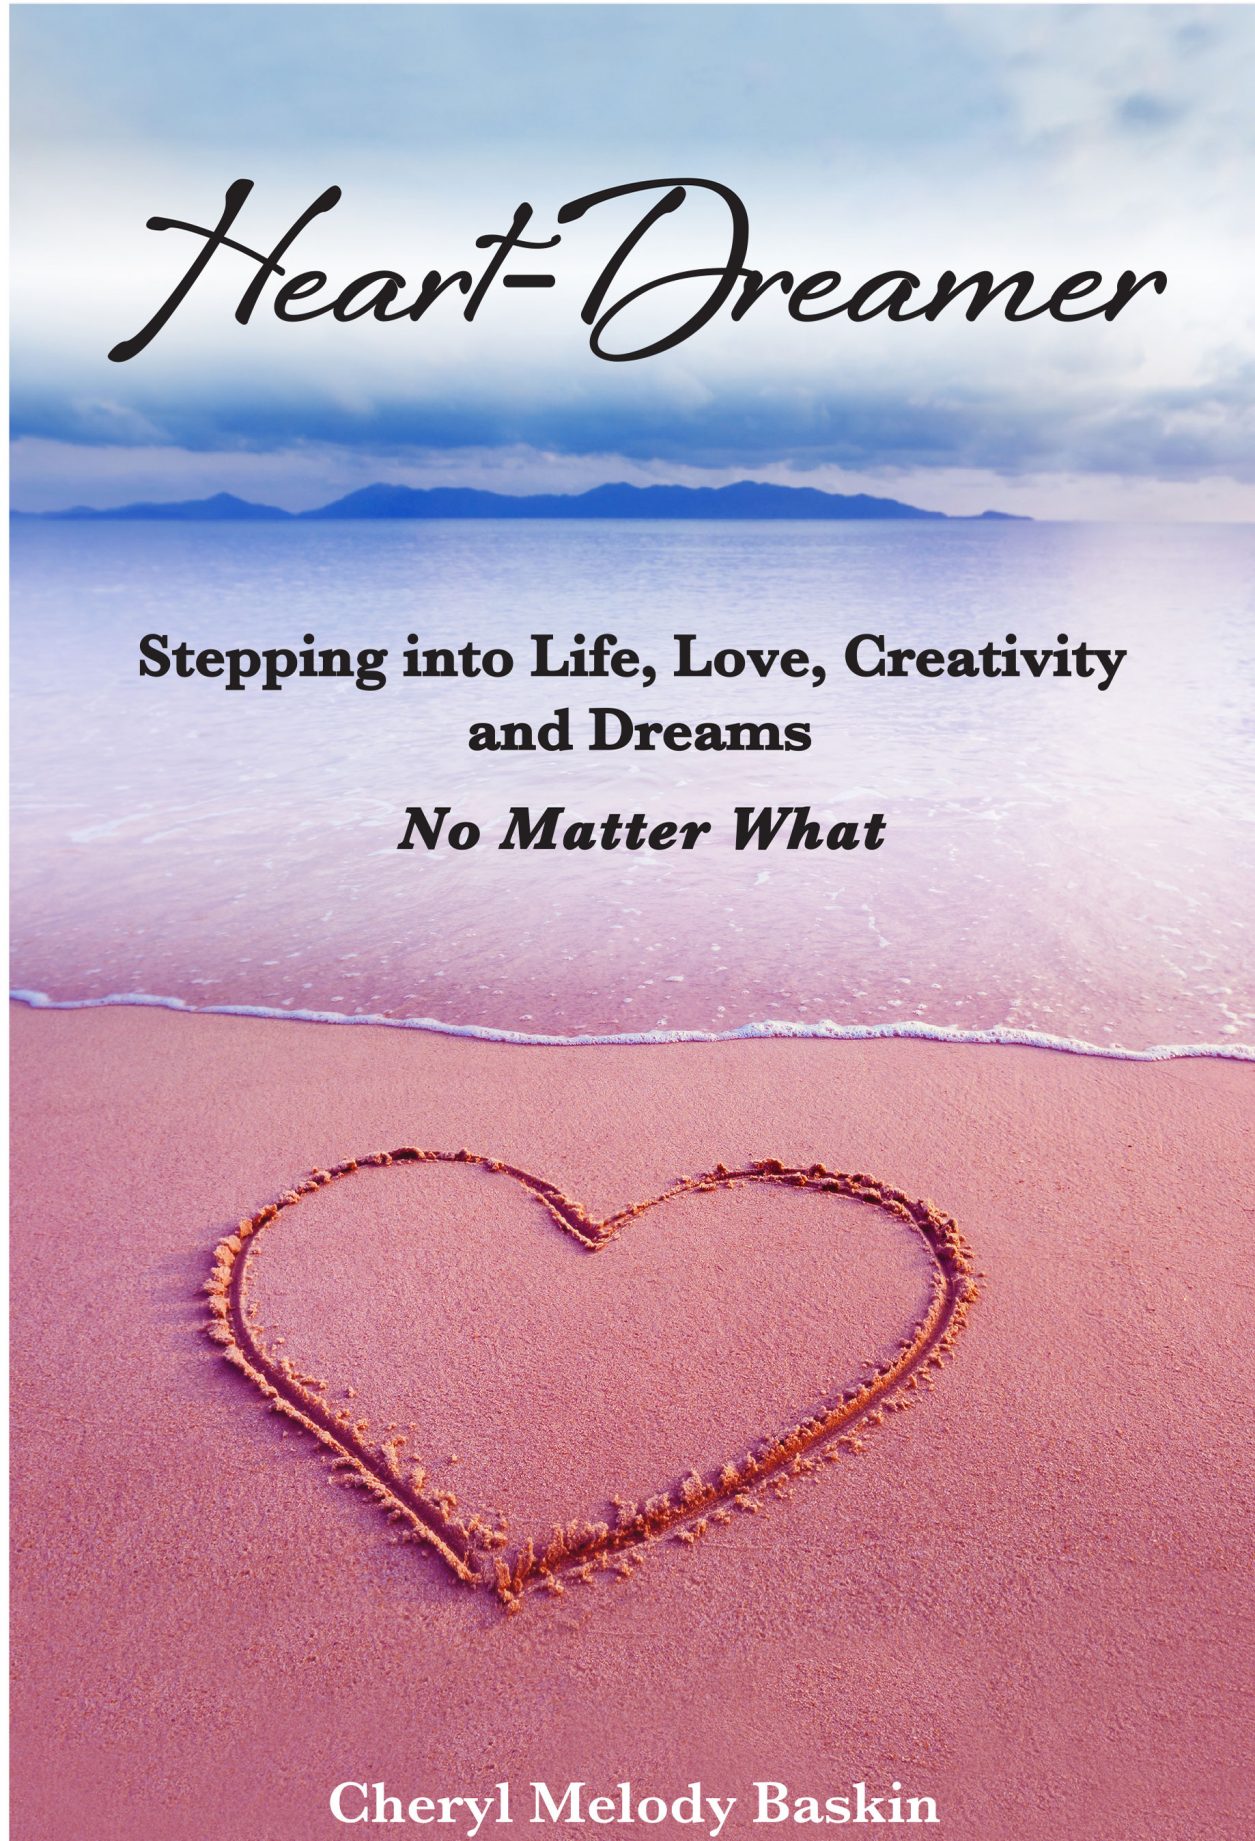 Heart-Dreamer: Stepping into Life, Love, Creativity and Dreams-No Matter What